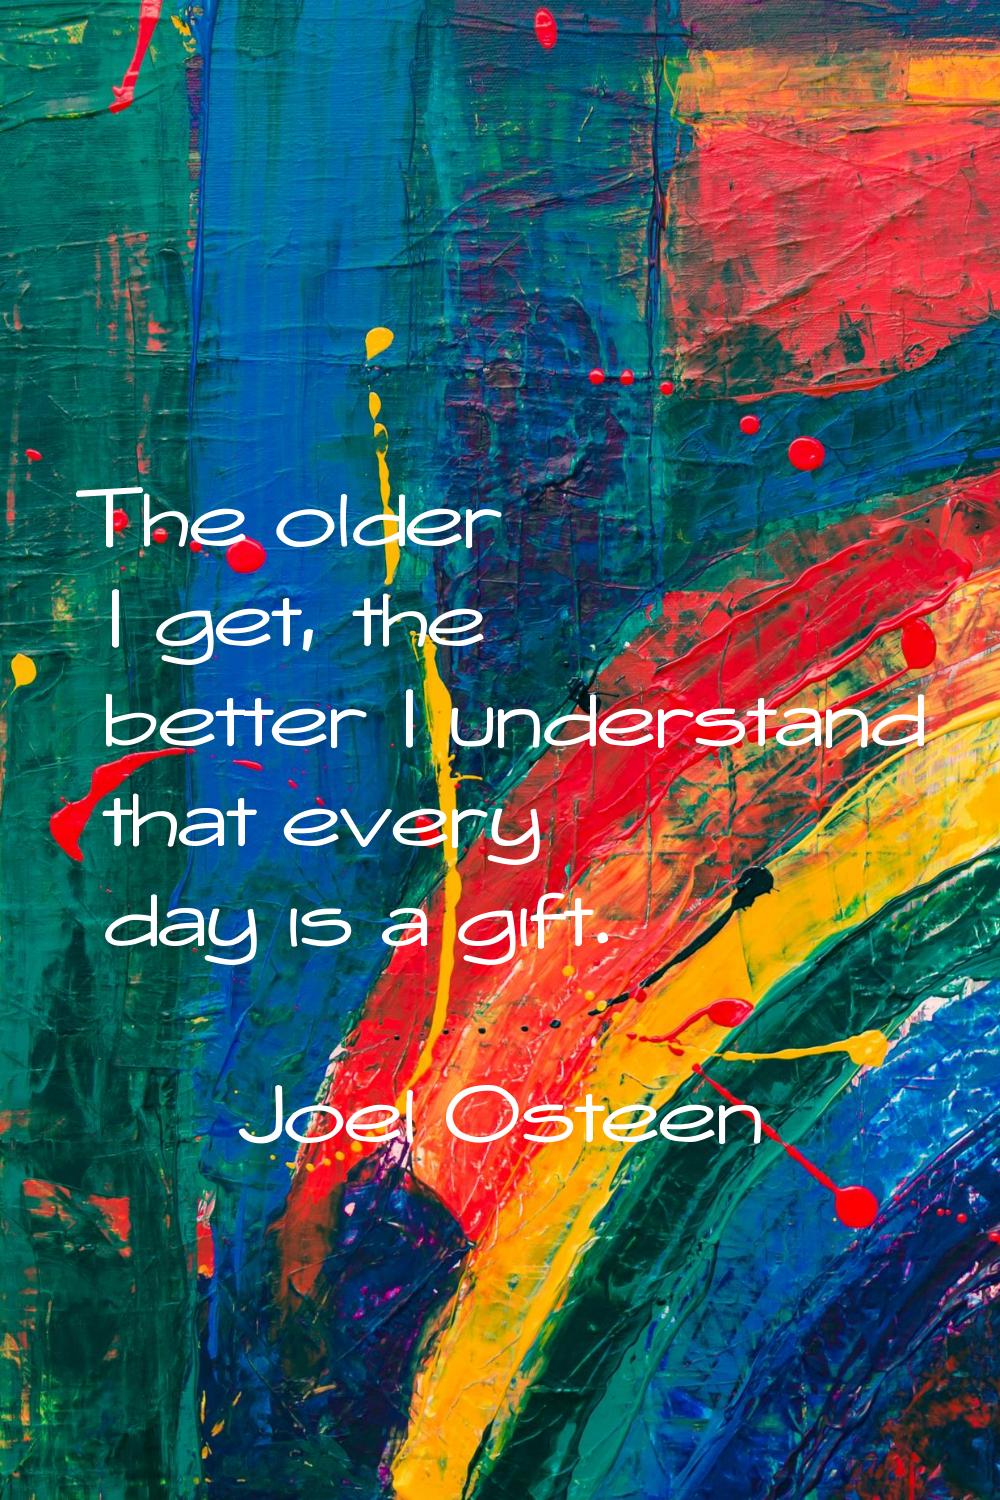 The older I get, the better I understand that every day is a gift.